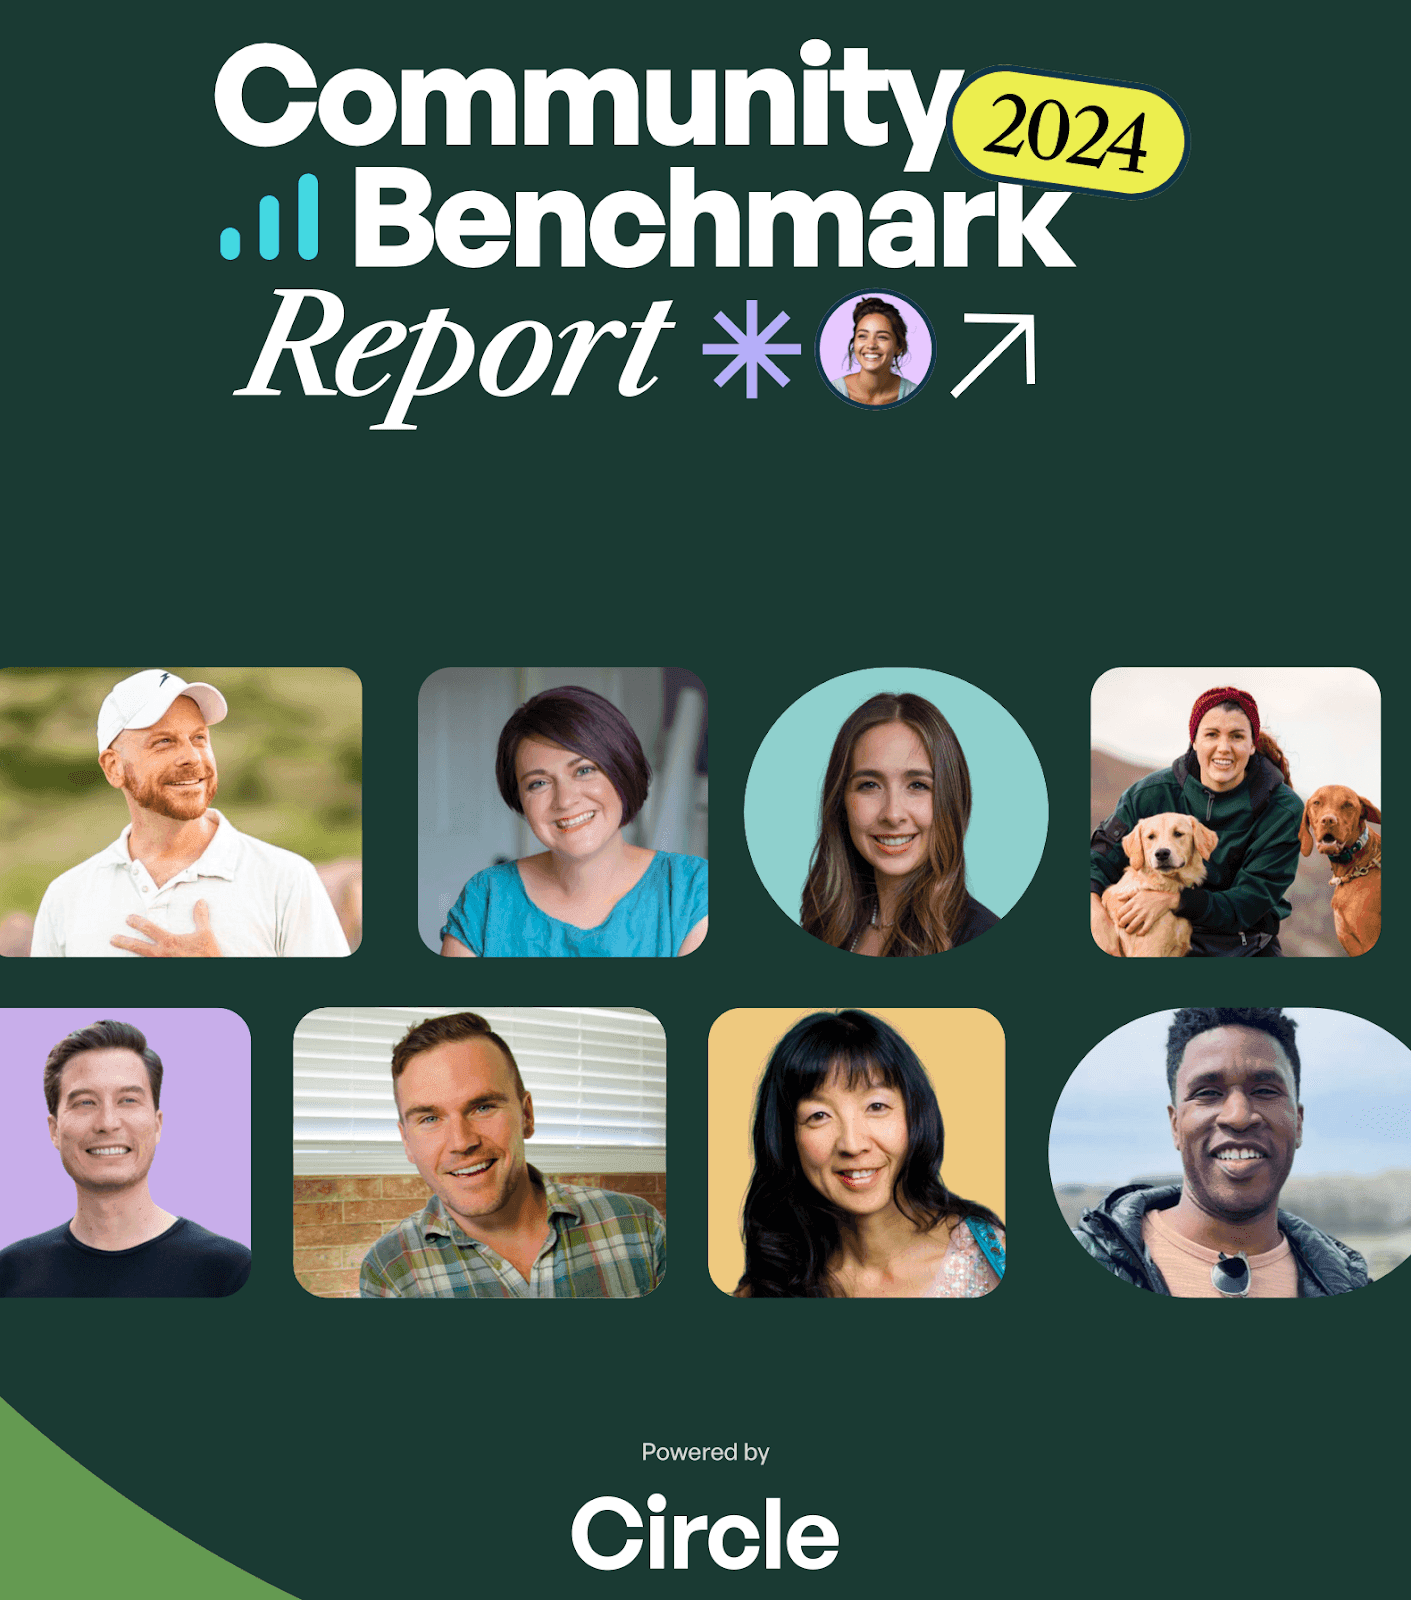 Community Benchmark Report 2024 Powered by Circle